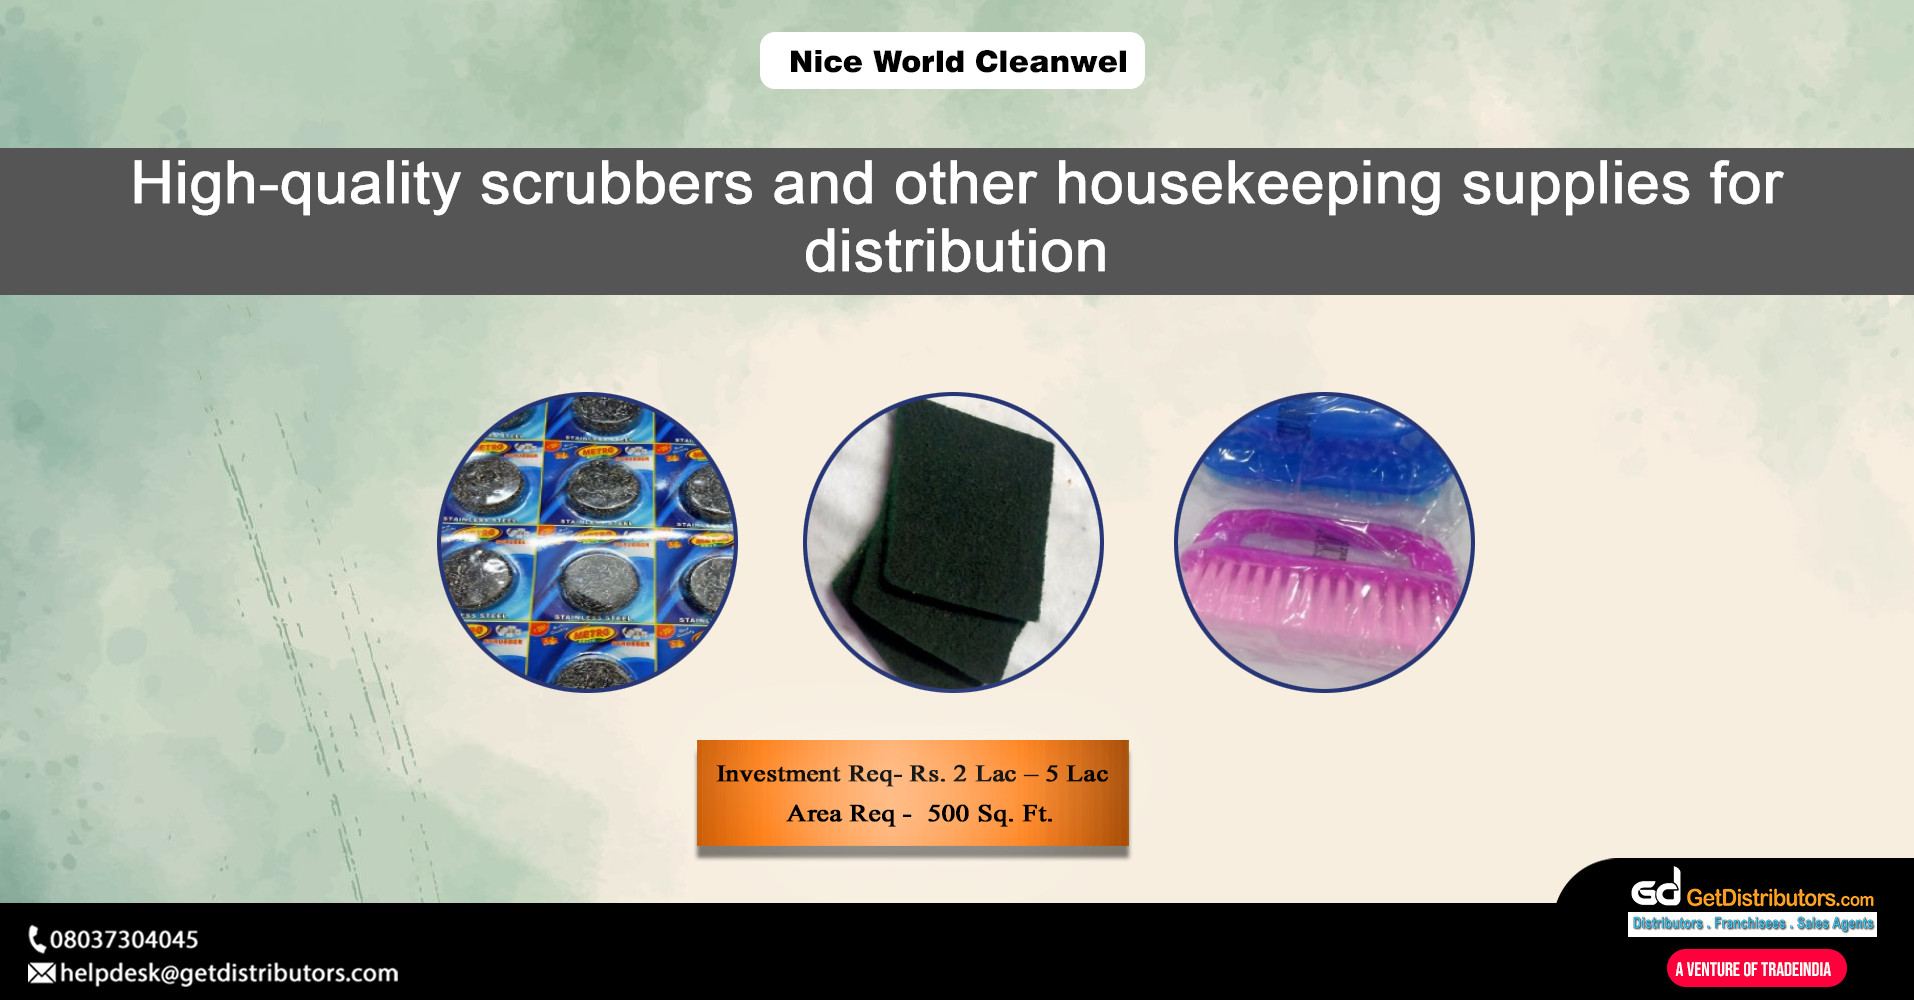 High-quality scrubbers and other housekeeping supplies for distribution